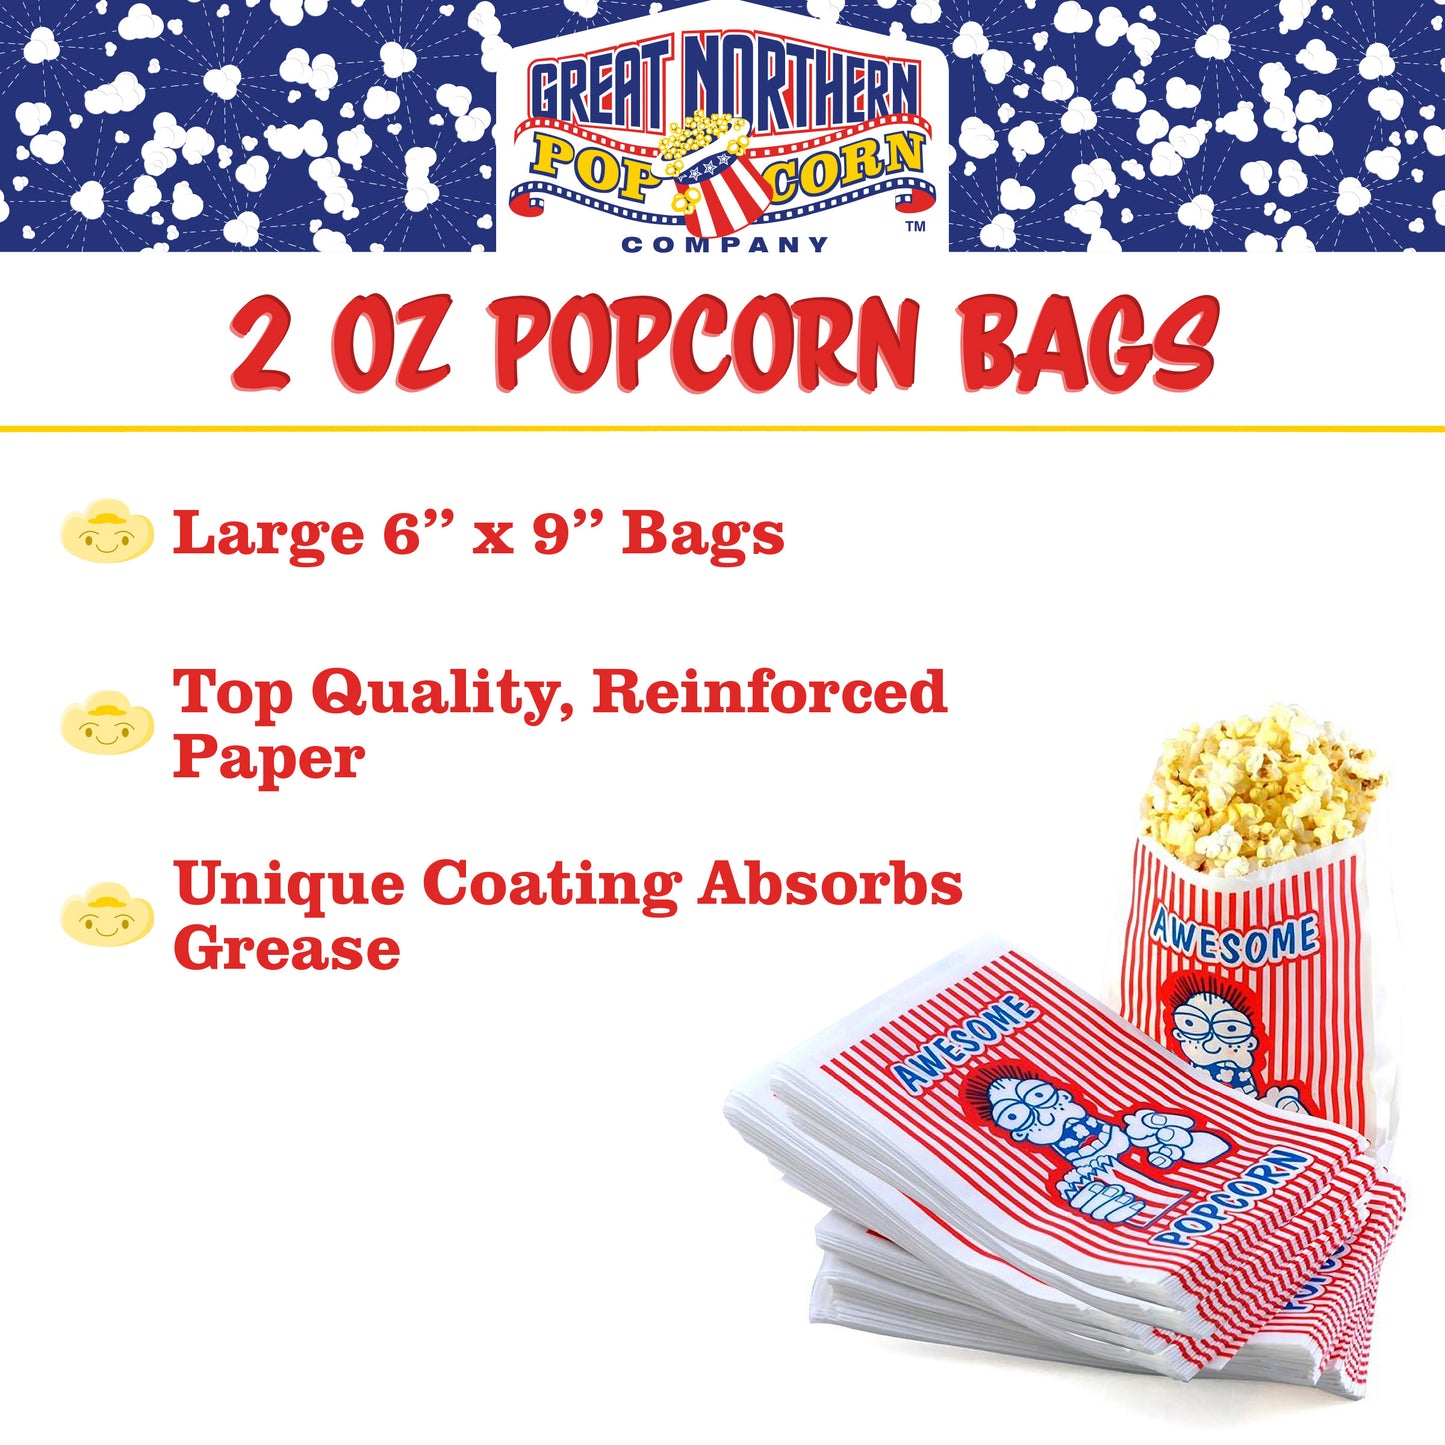 100 Popcorn Bags and 2.5 Ounce All-in-One Popcorn Packs  – Case of 24